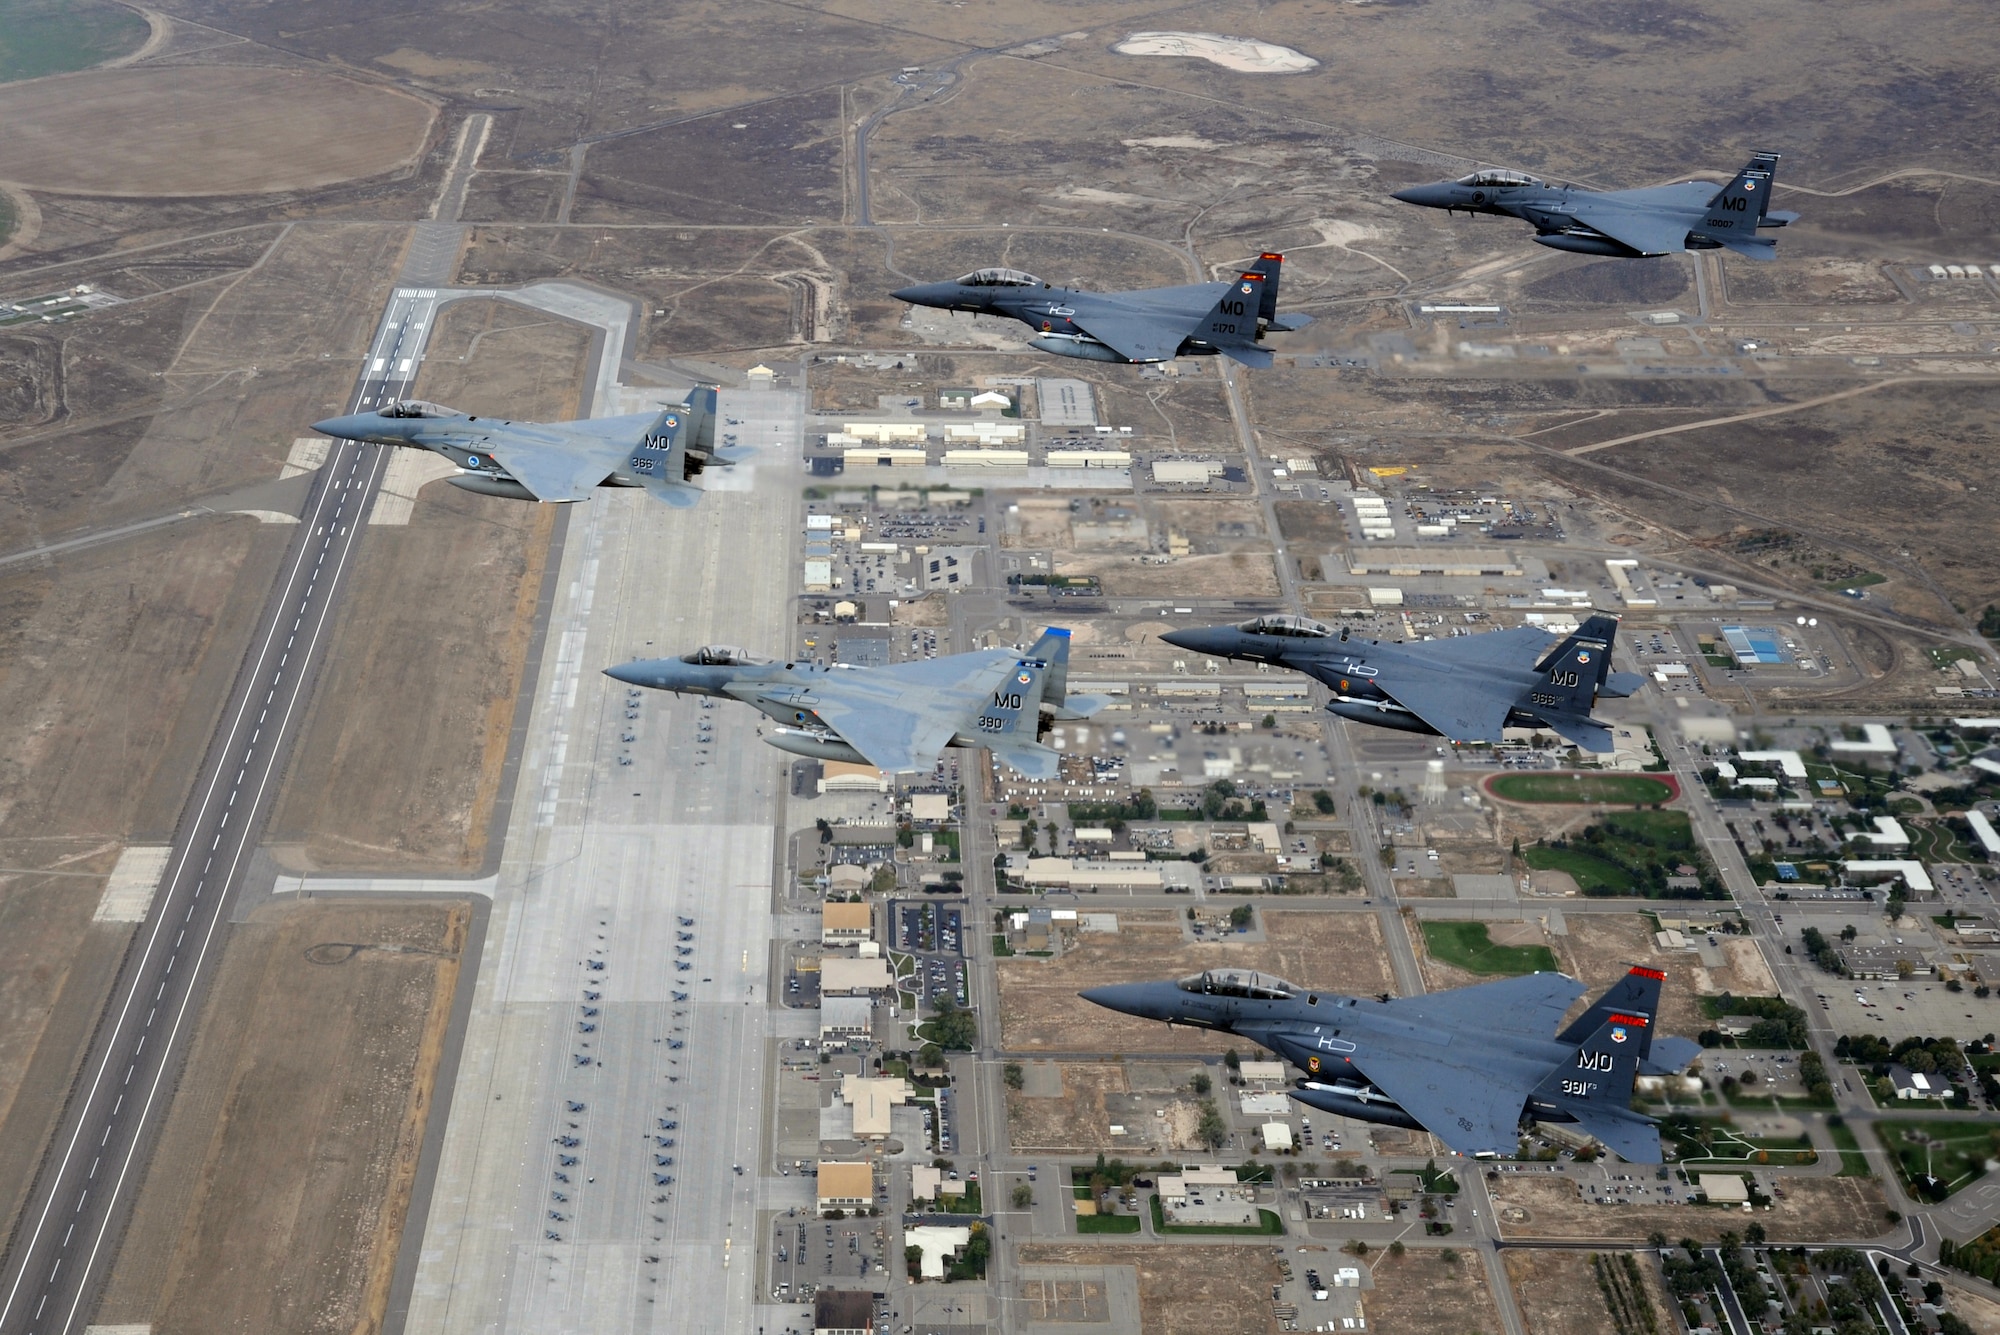 OVER IDAHO -- A six-ship formation of F-15C Eagle and F-15E Strike Eagles fly over Mountain Home Air Force Base Oct. 13. (U.S. Air Force photo by Master Sgt. Kevin J. Gruenwald)